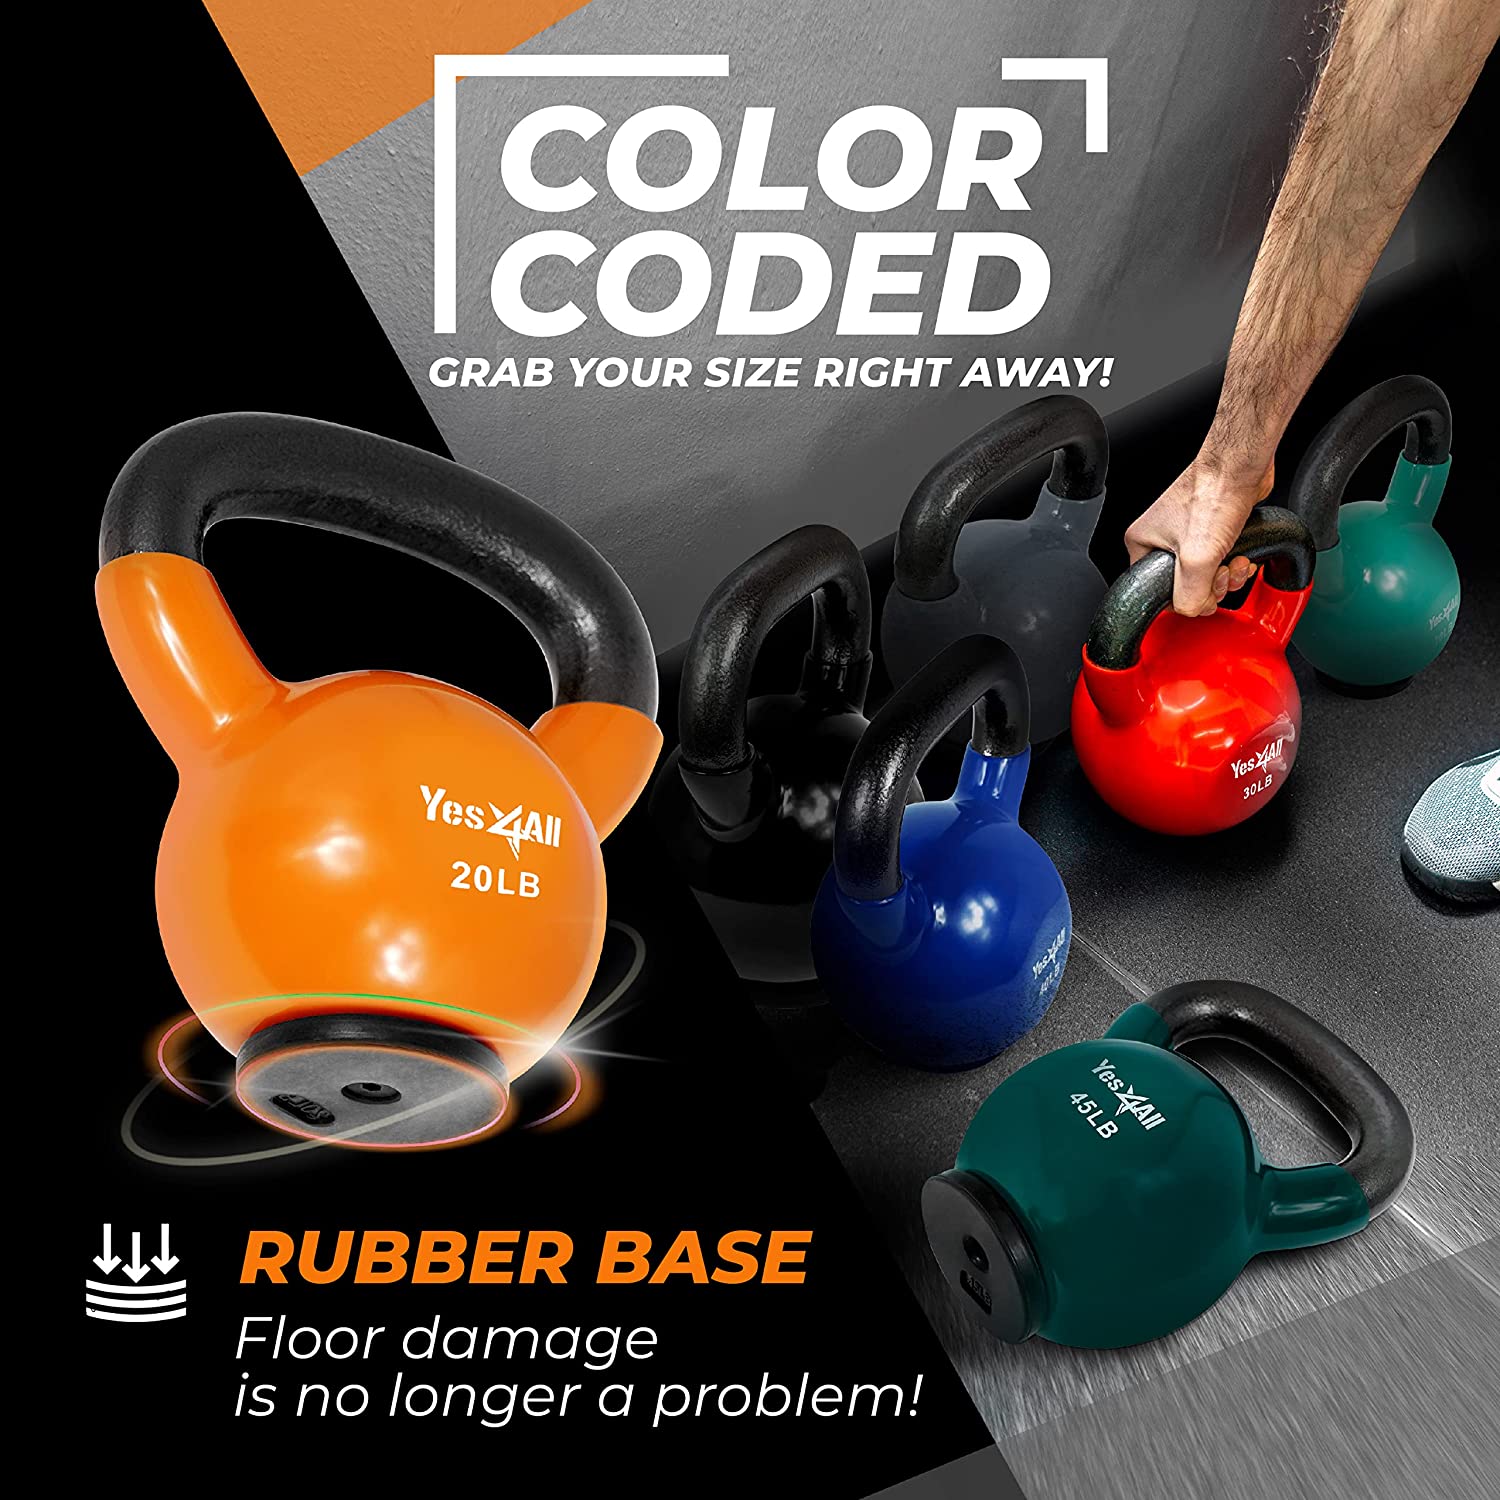 Yes4All 20lb Vinyl Coated / PVC Kettlebell with Rubber Base, Orange, Single - image 5 of 8